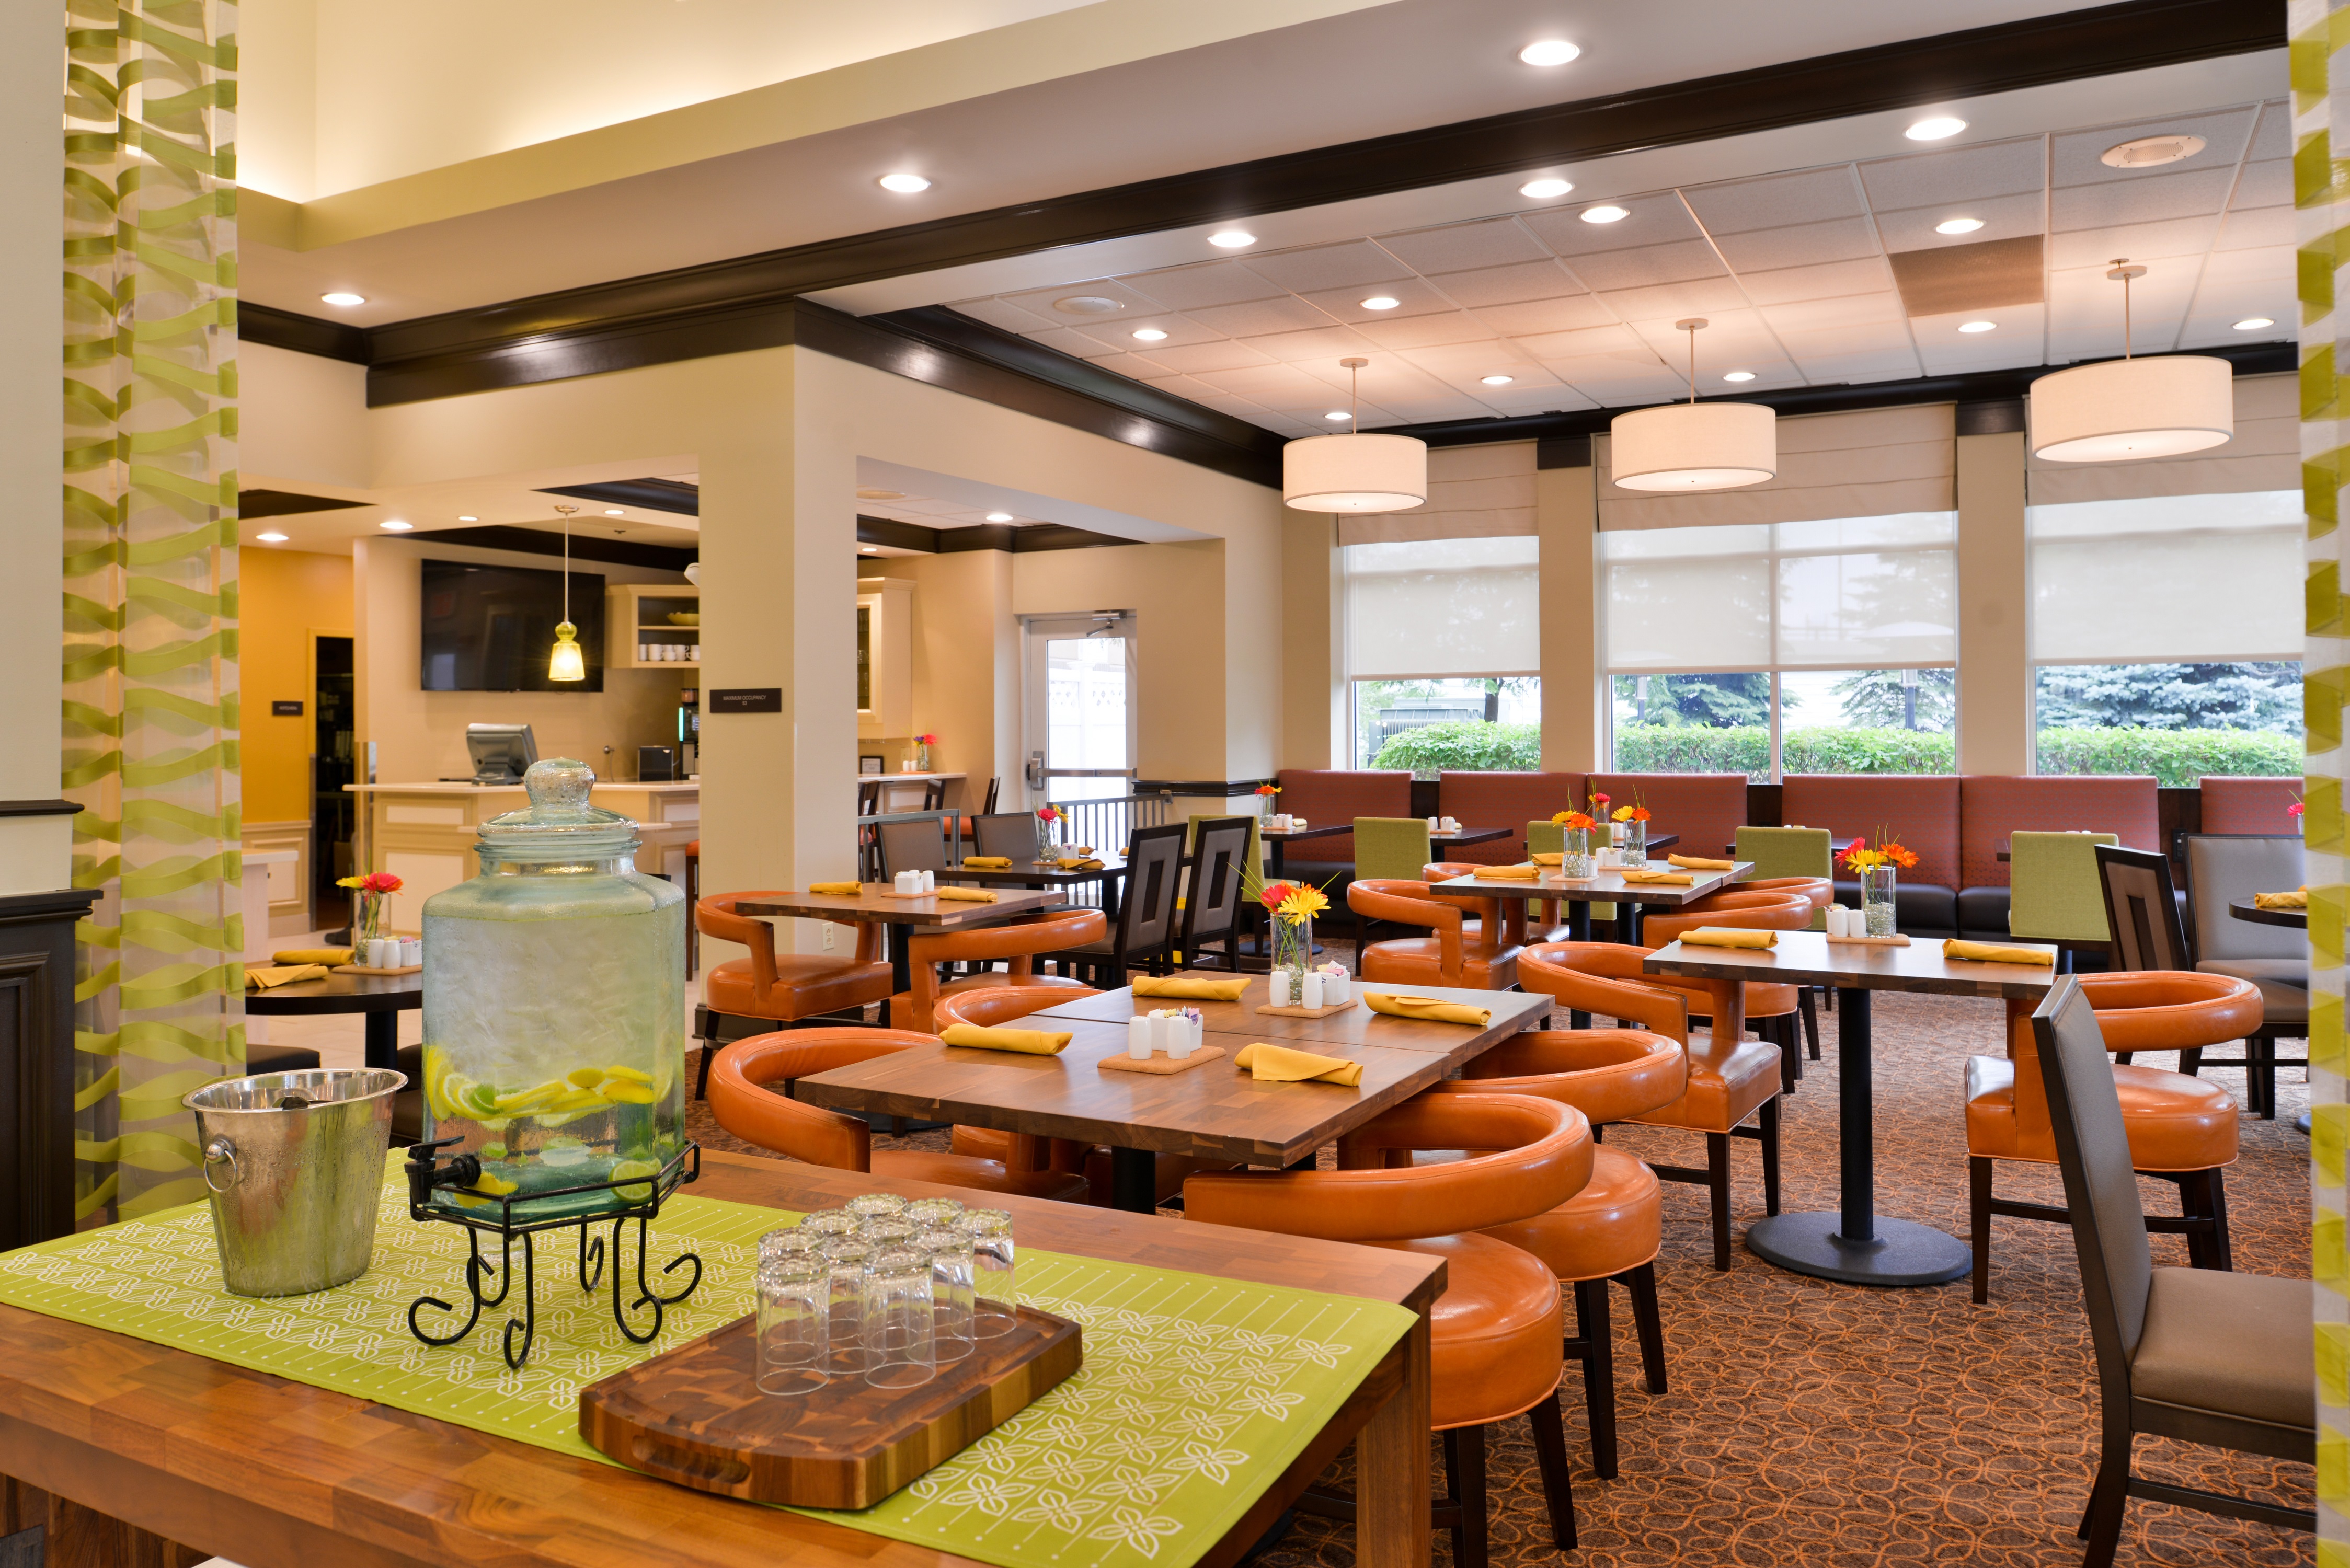 Enjoy A Freshly Cooked Meal In Our Dining Area. 